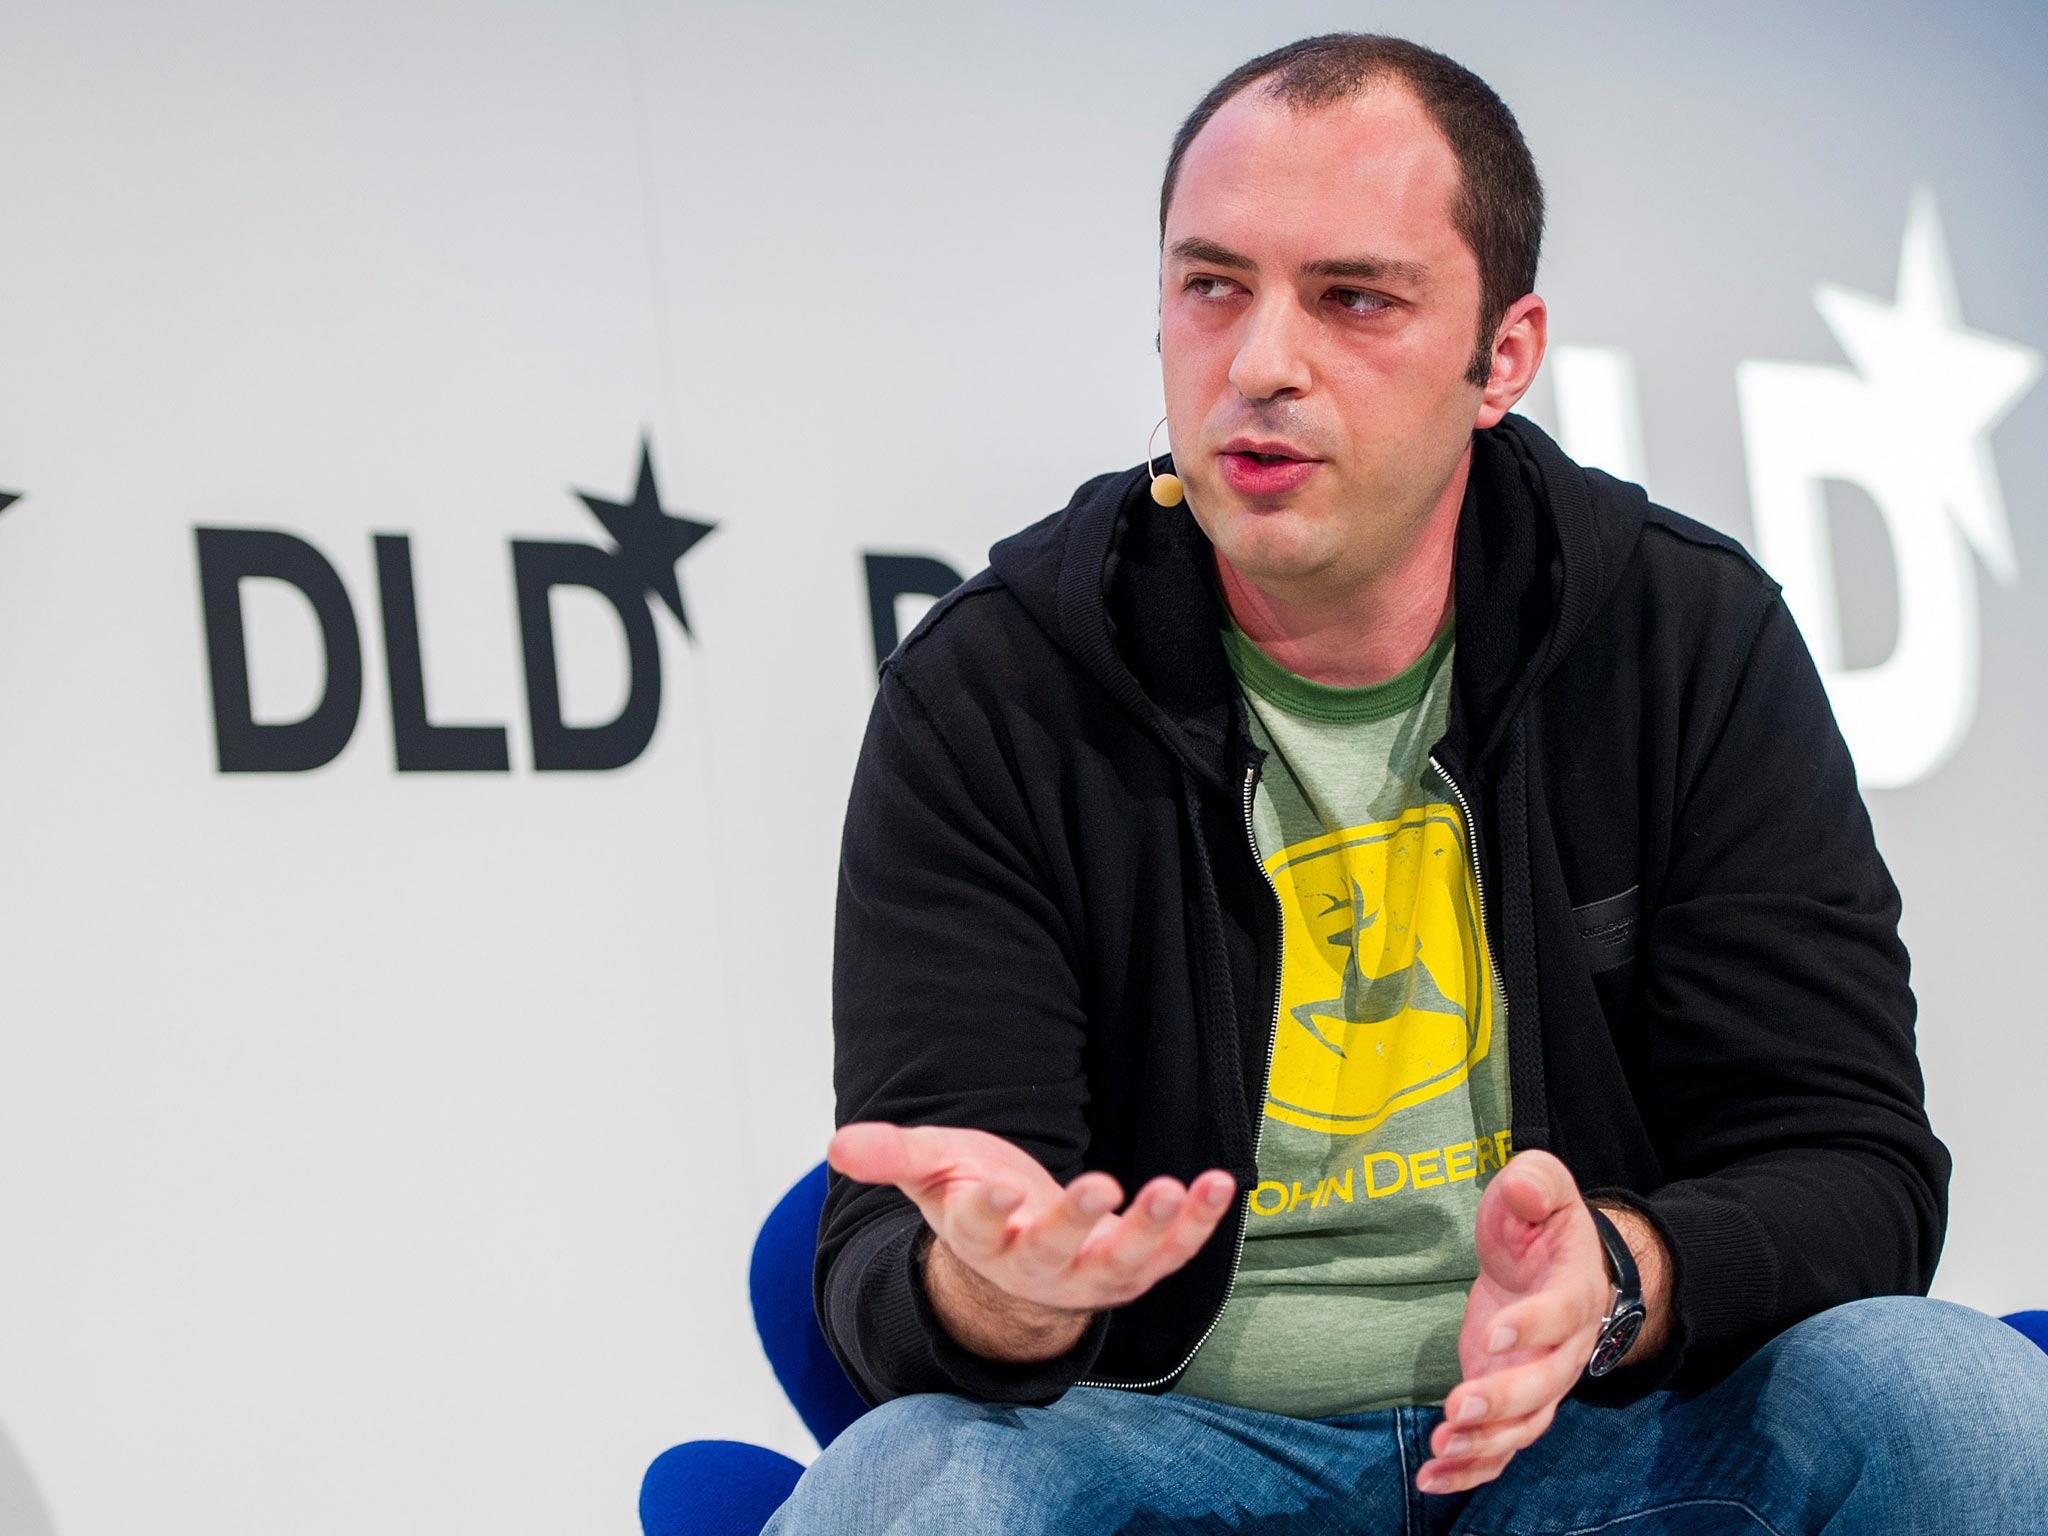 Jan Koum, the co-founder of WhatsApp who sold the company to Facebook for $19bn last week, announced a new voice service will arrive in the coming months.